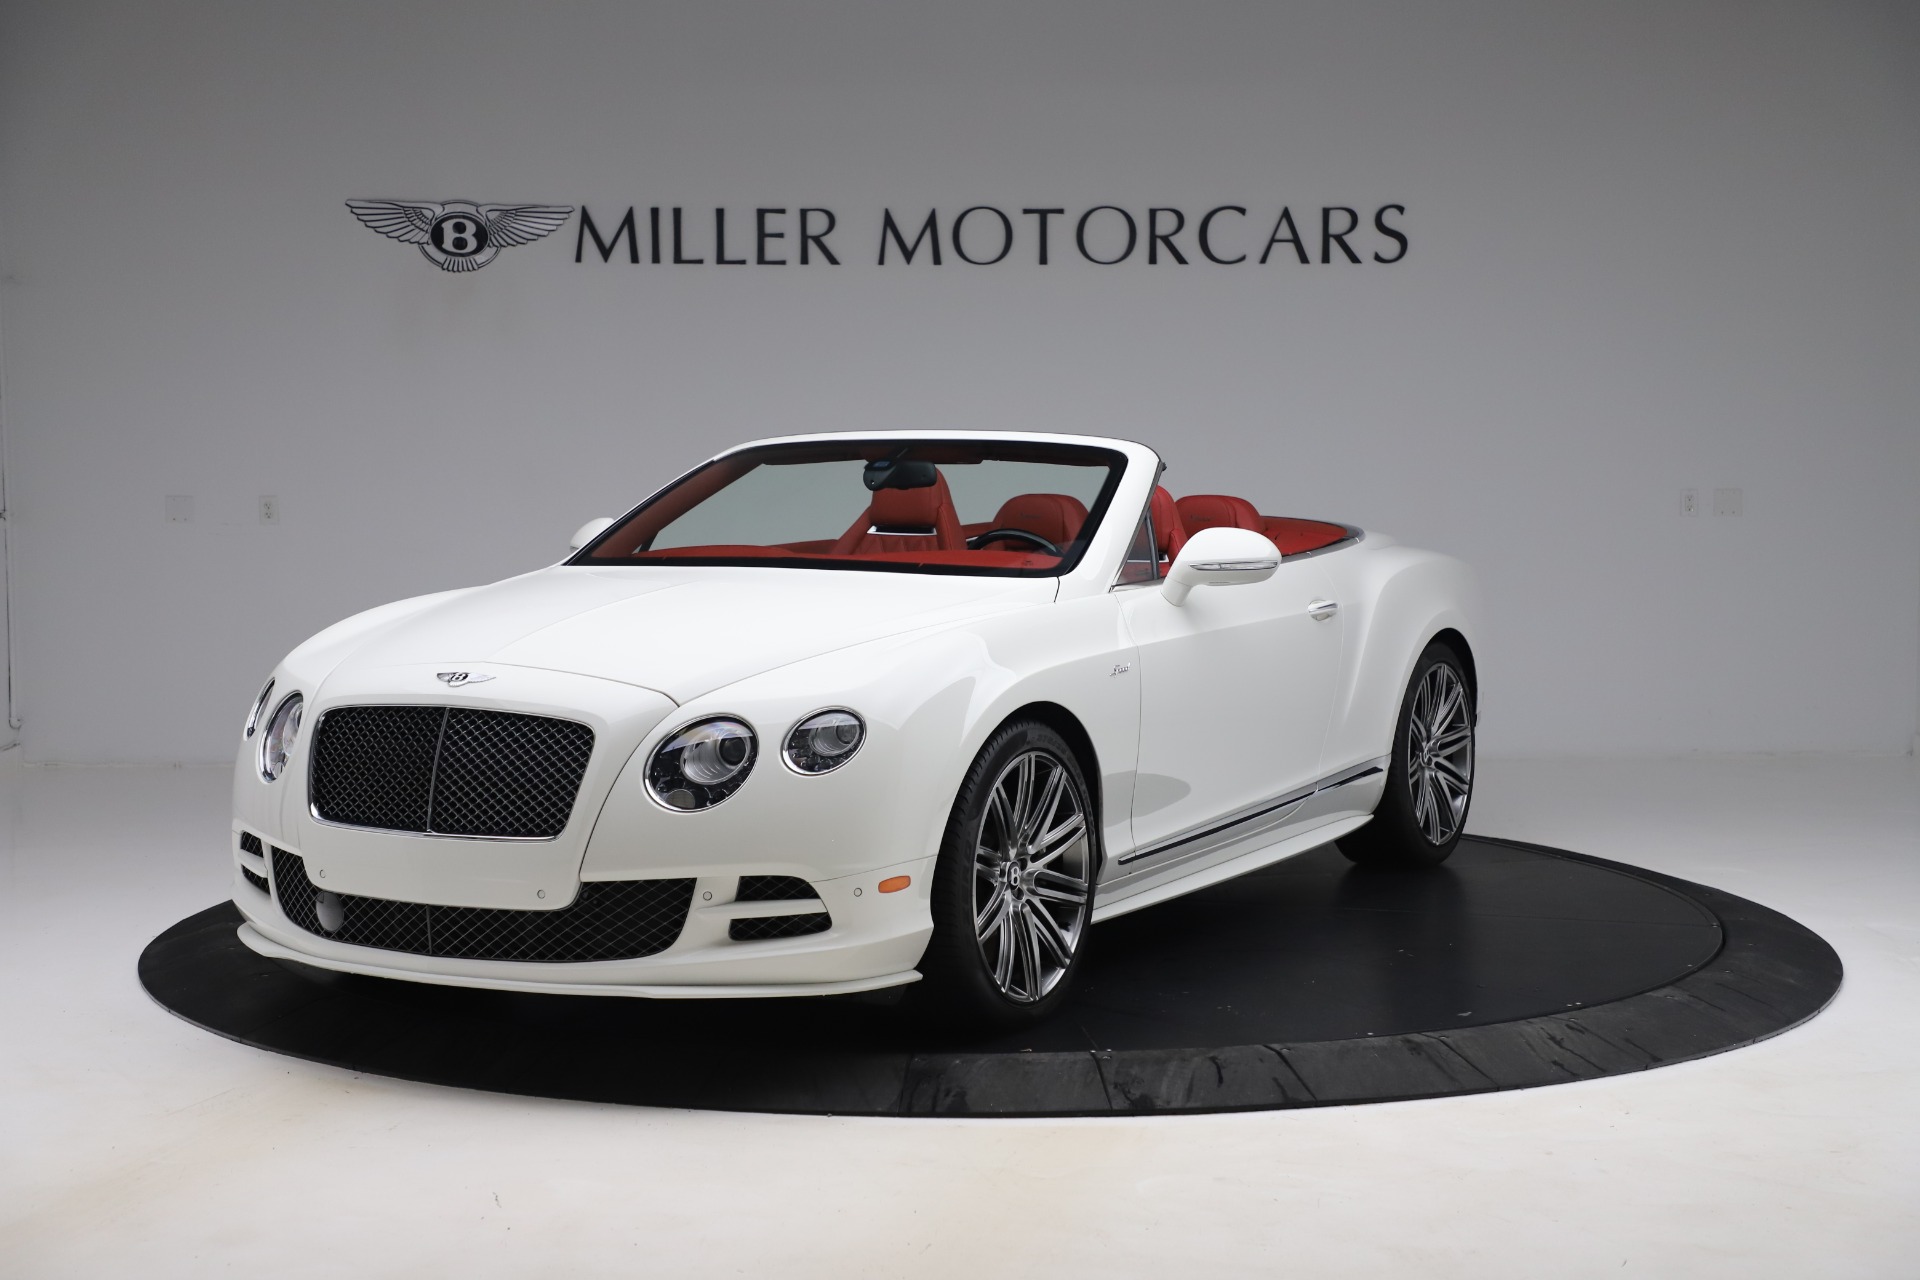 Used 2015 Bentley Continental GT Speed for sale Sold at Aston Martin of Greenwich in Greenwich CT 06830 1